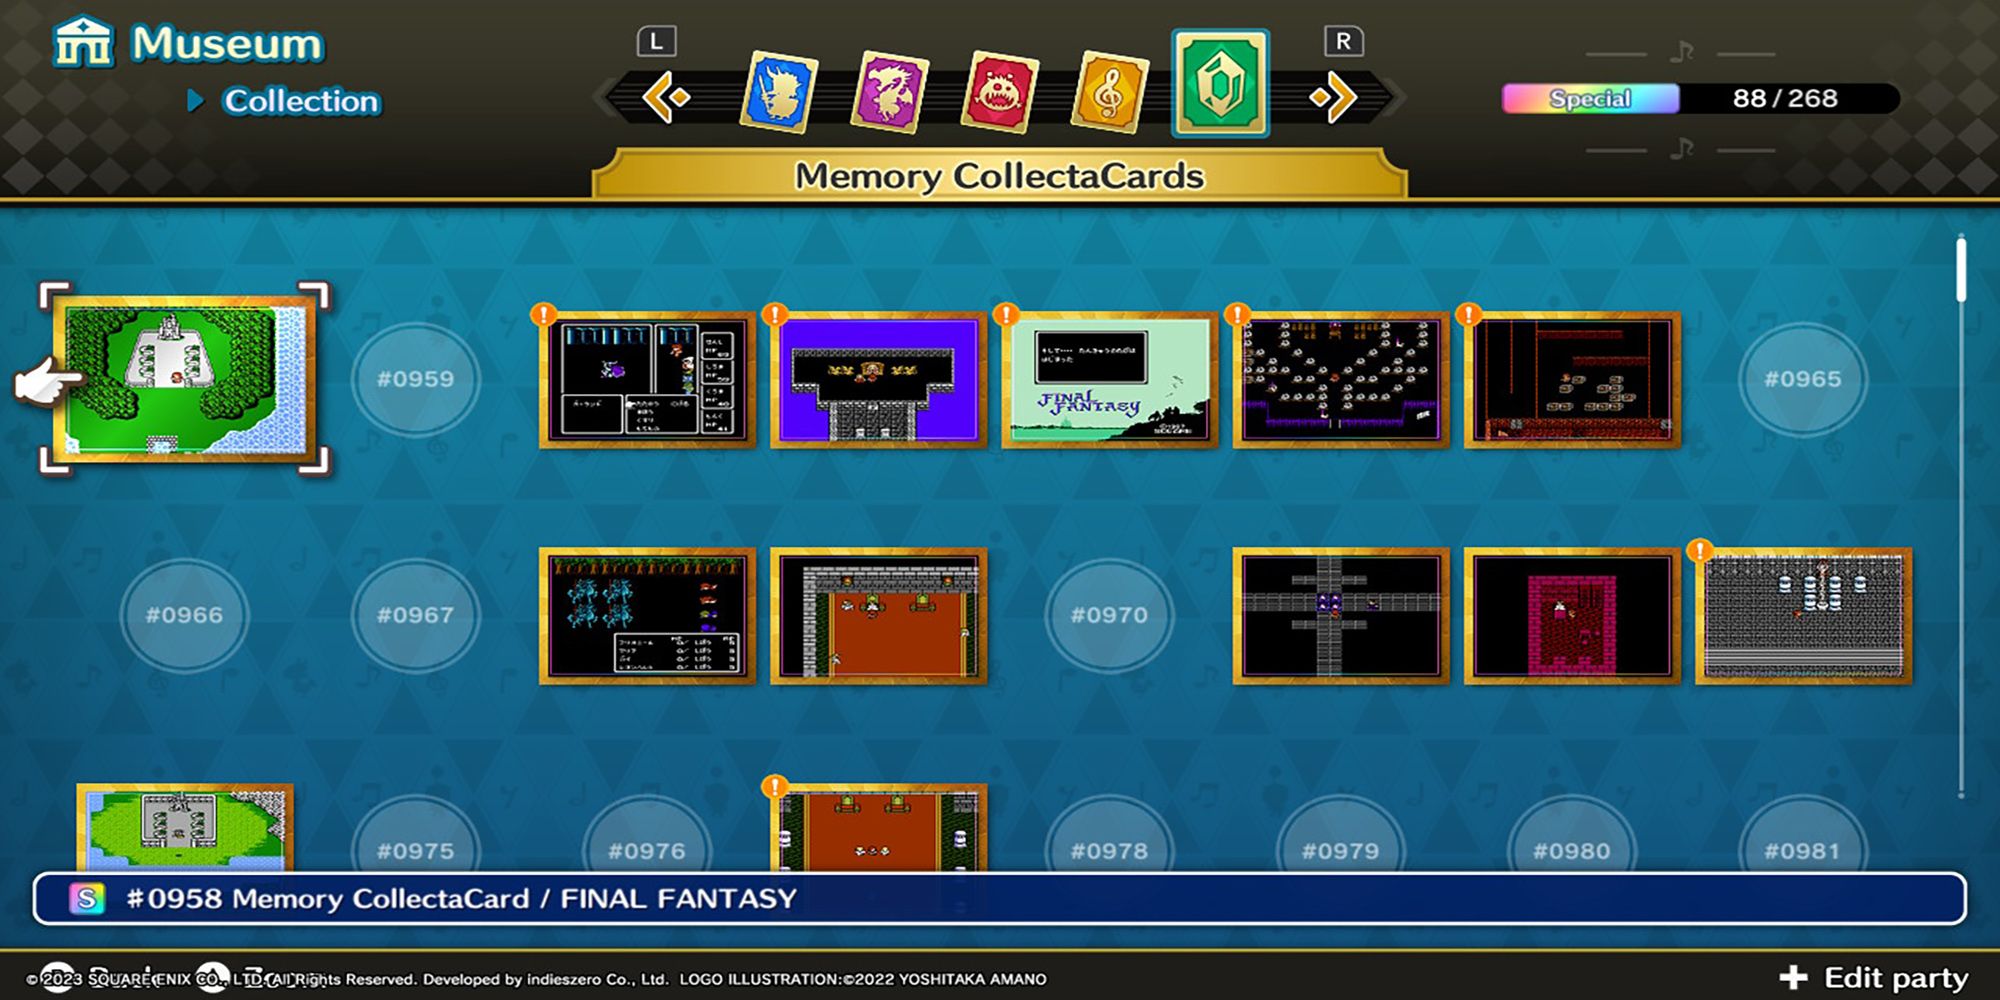 An assortment of Final Fantasy screenshots fill the Memory CollectaCard collection in Theatrhythm: Final Bar Line.